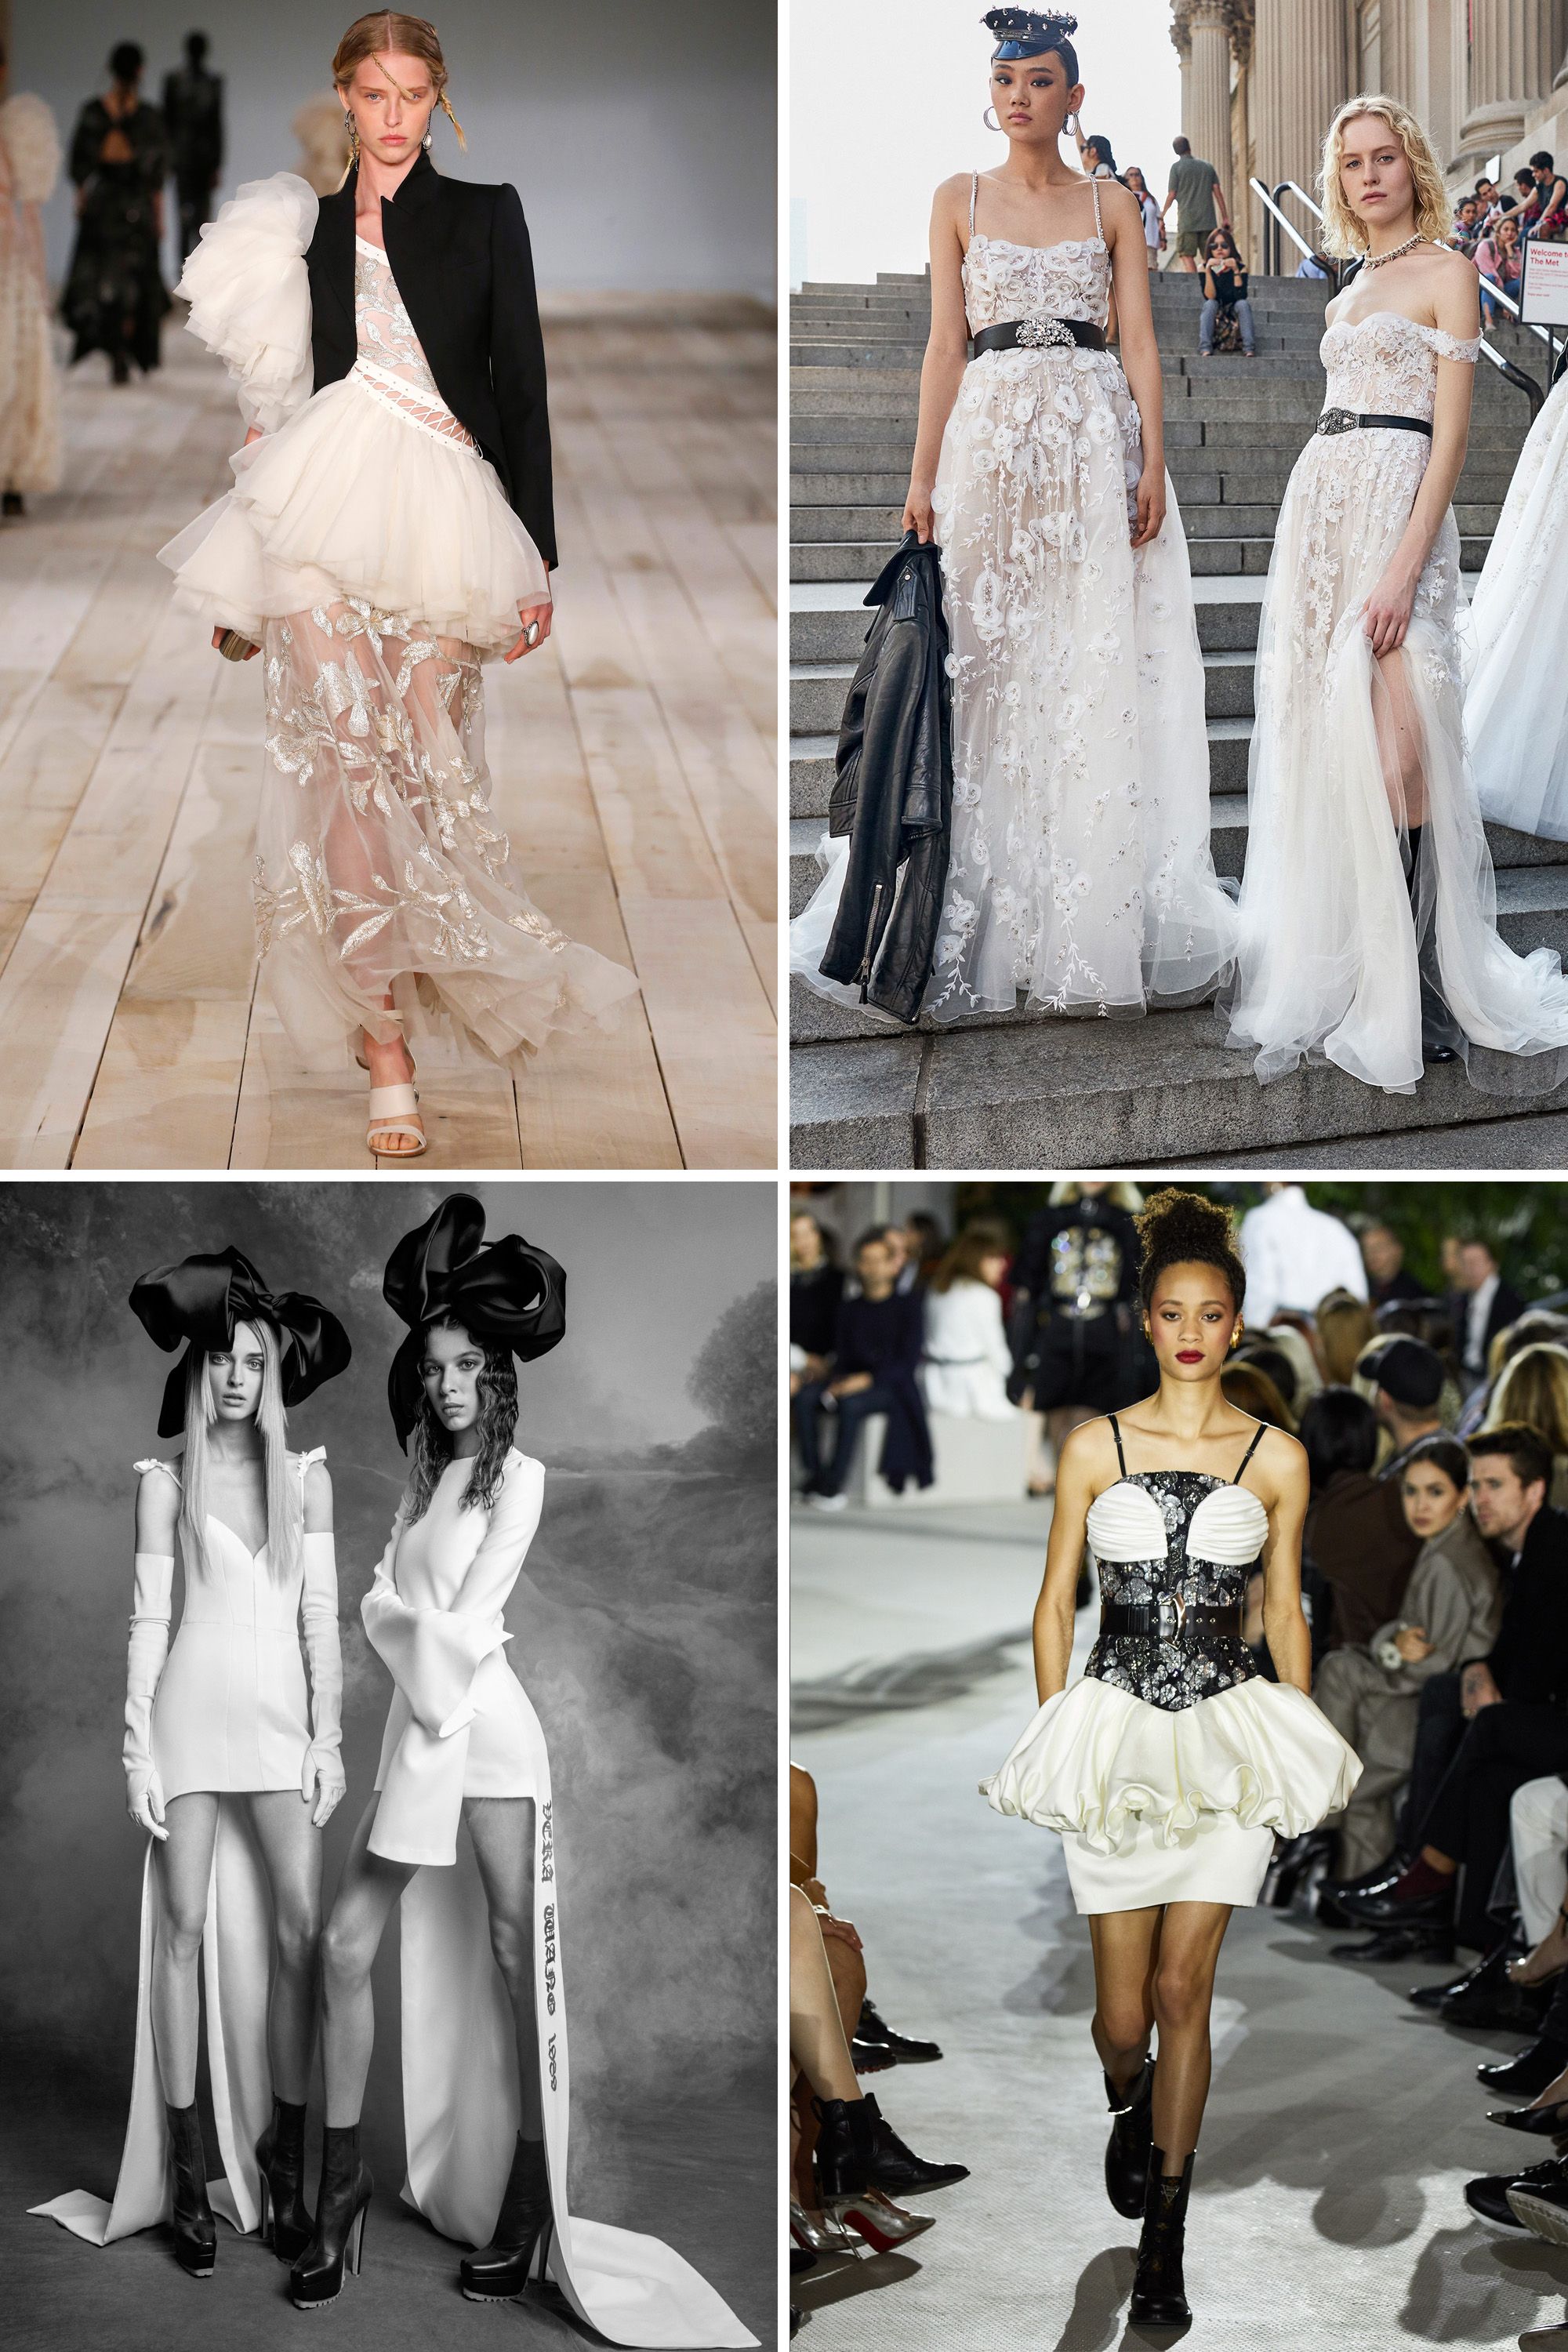 How Wedding Dresses Have Changed in the Last 100 Years